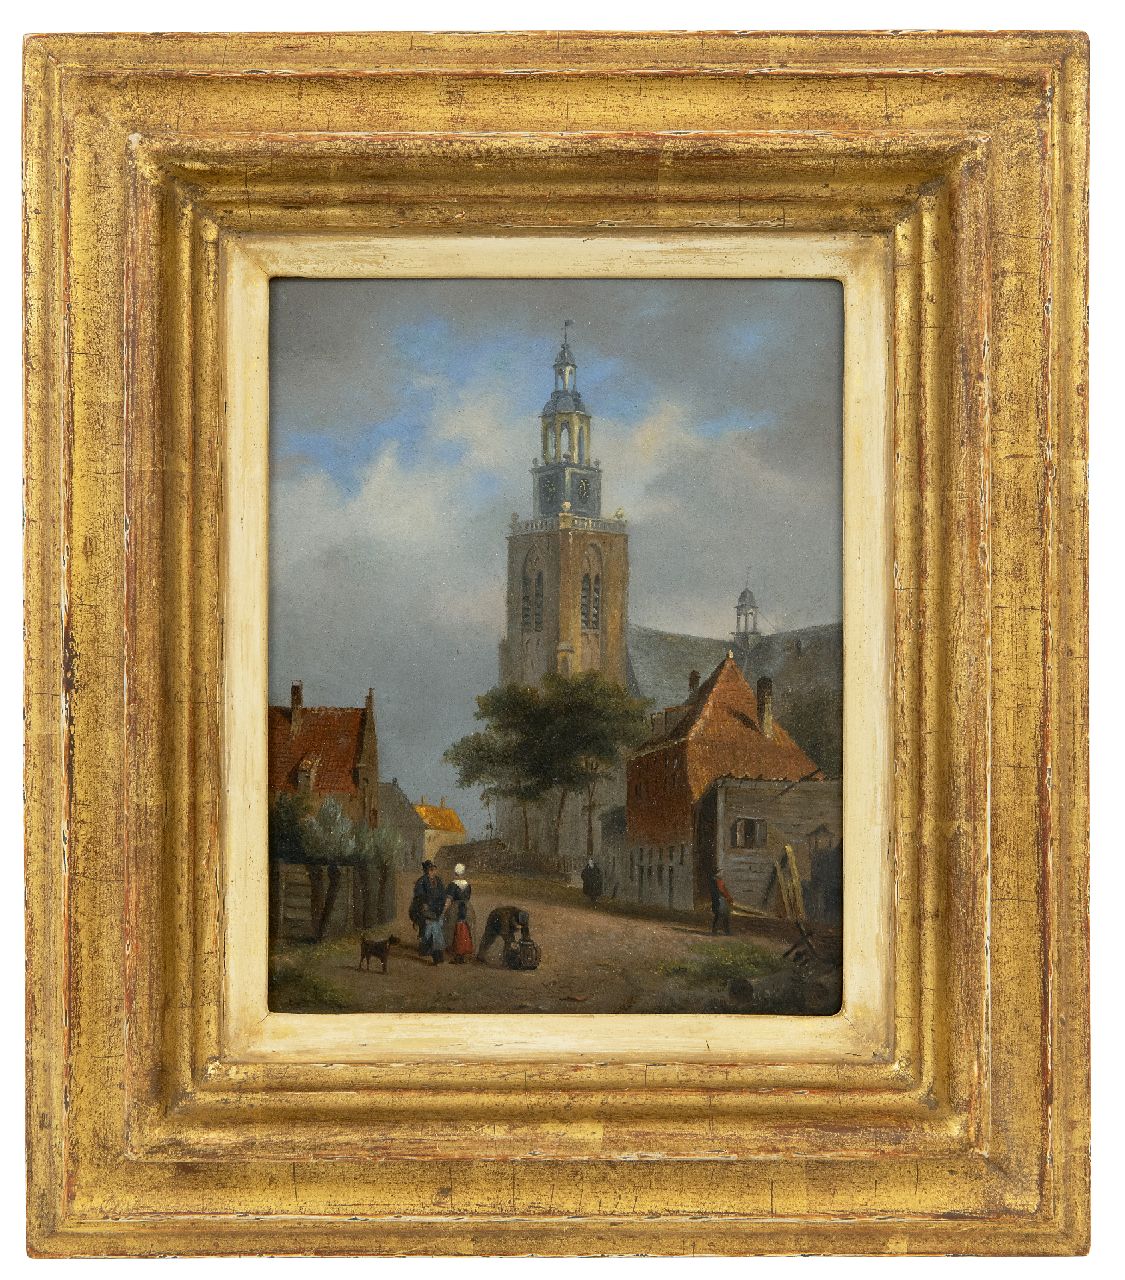 Hove B.J. van | Bartholomeus Johannes 'Bart' van Hove | Paintings offered for sale | A view of Maassluis with the Grote Kerk, oil on panel 17.3 x 13.5 cm